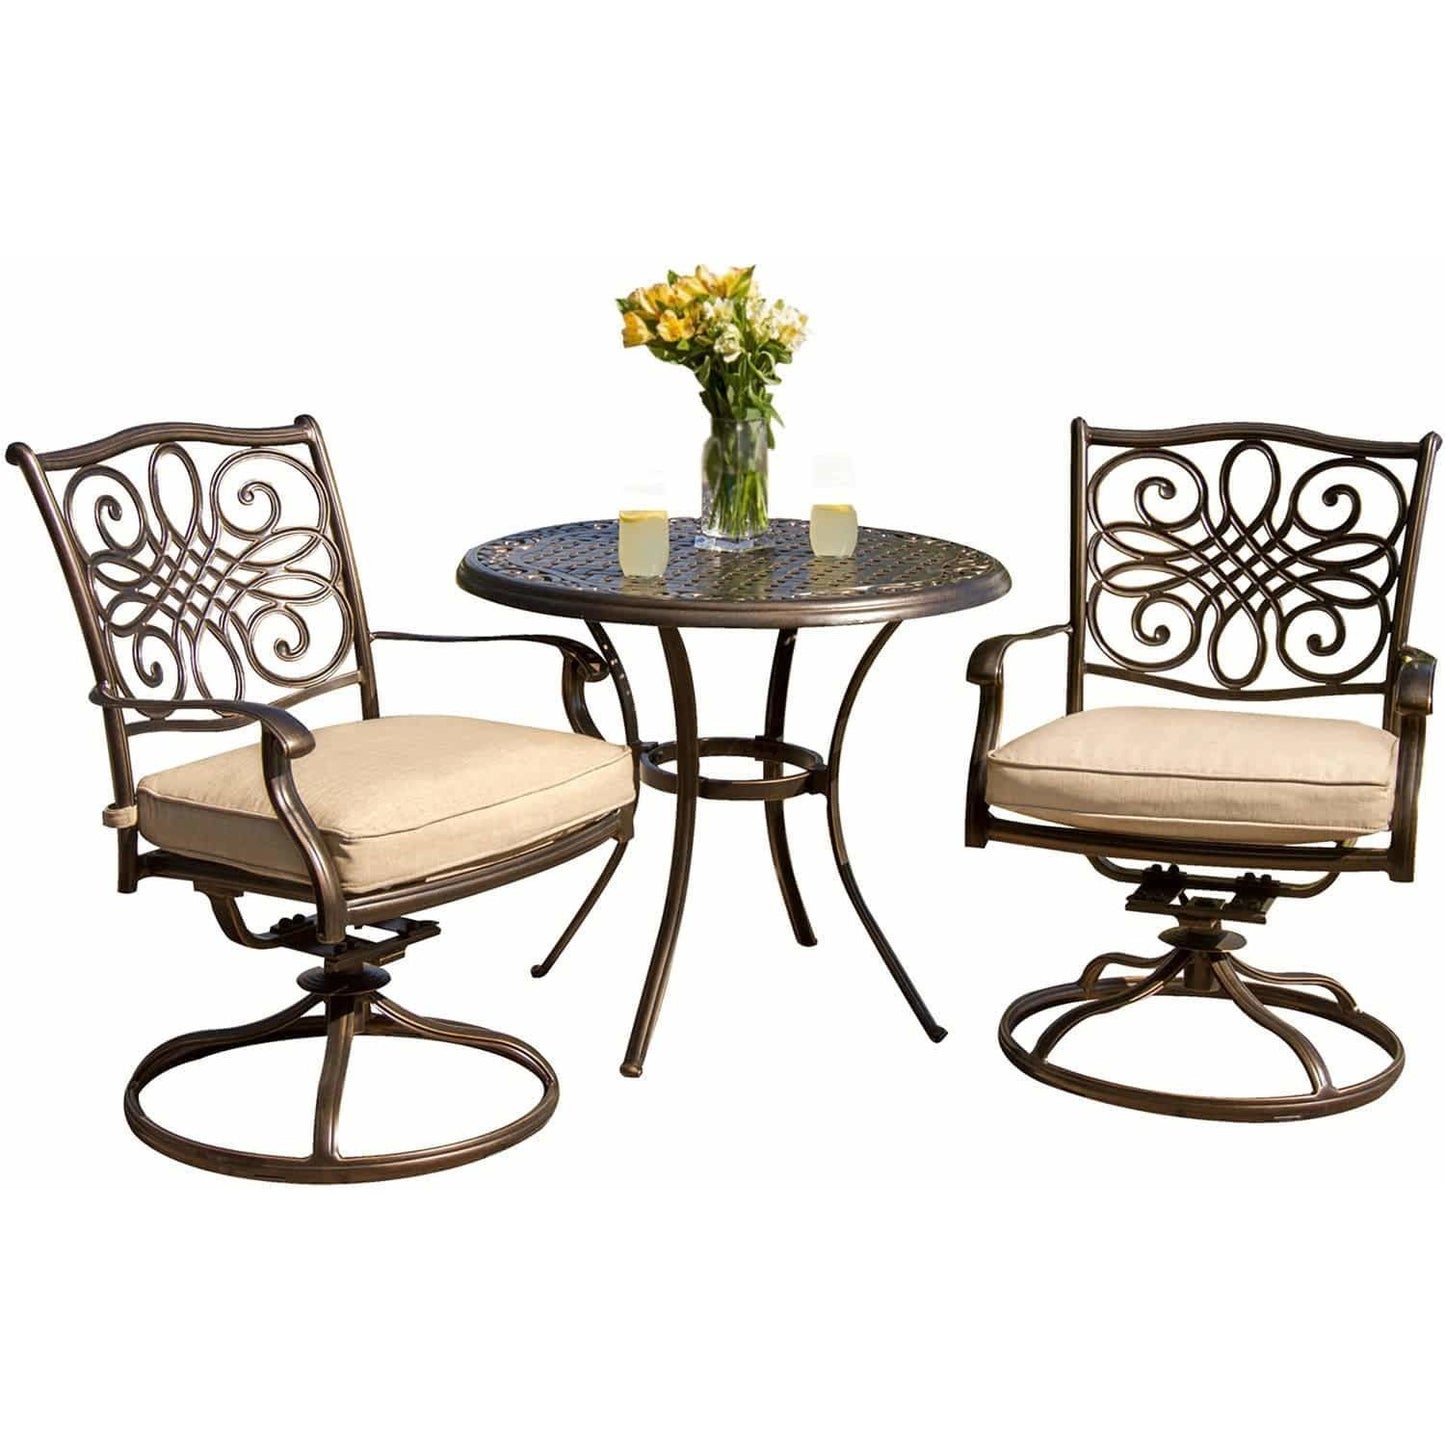 Hammond Adams 3pc outdoor dining set 2 swivel rockers and round table - M&K Grills